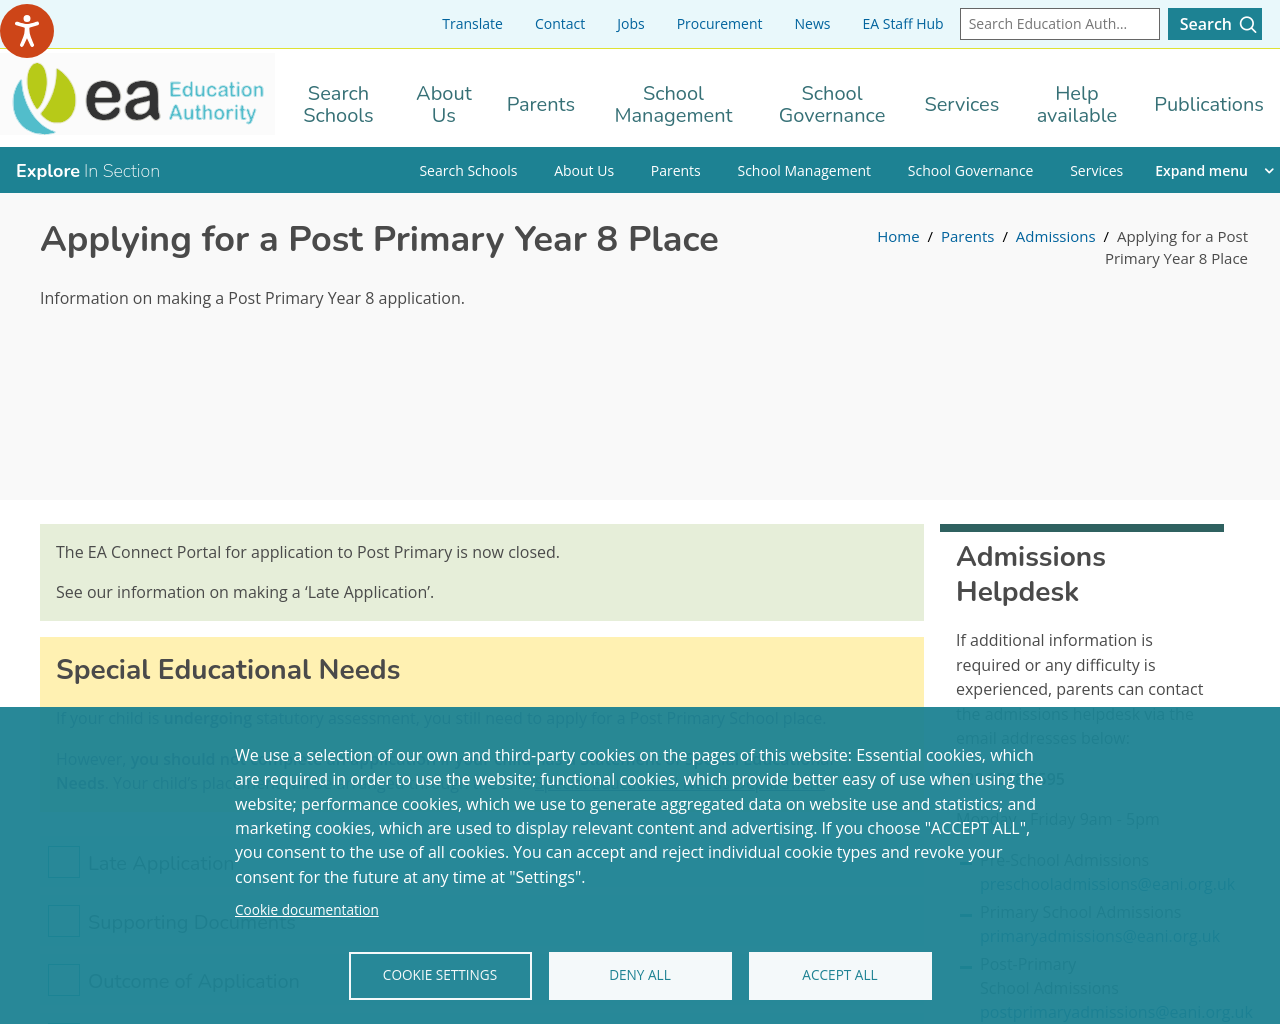 Post-primary admissions guidance